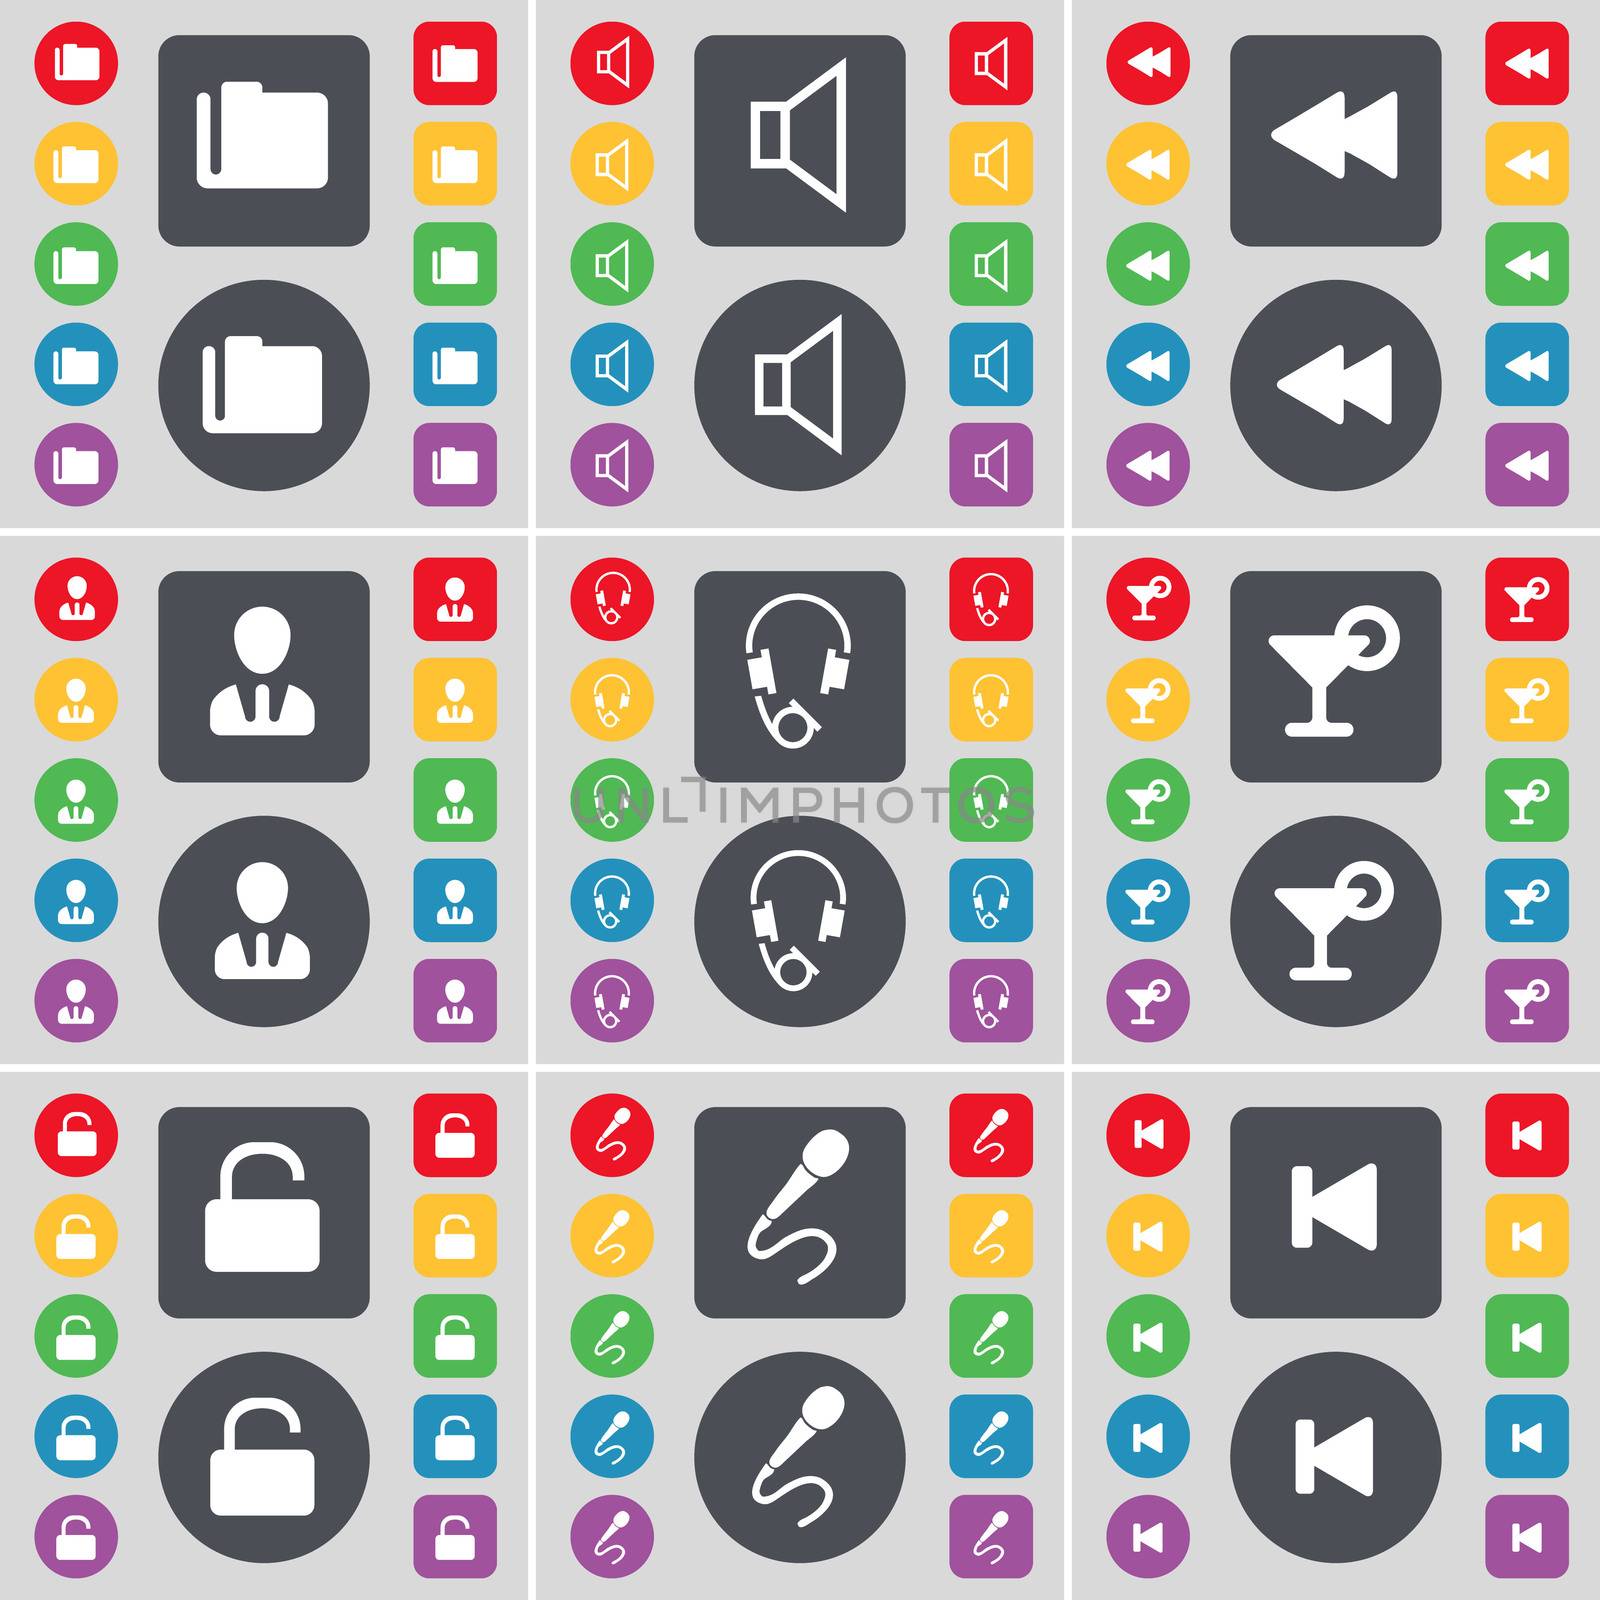 Folder, Sound, Rewind, Avatar, Headphones, Cocktail, Lock, Microphone, Media skip icon symbol. A large set of flat, colored buttons for your design. illustration